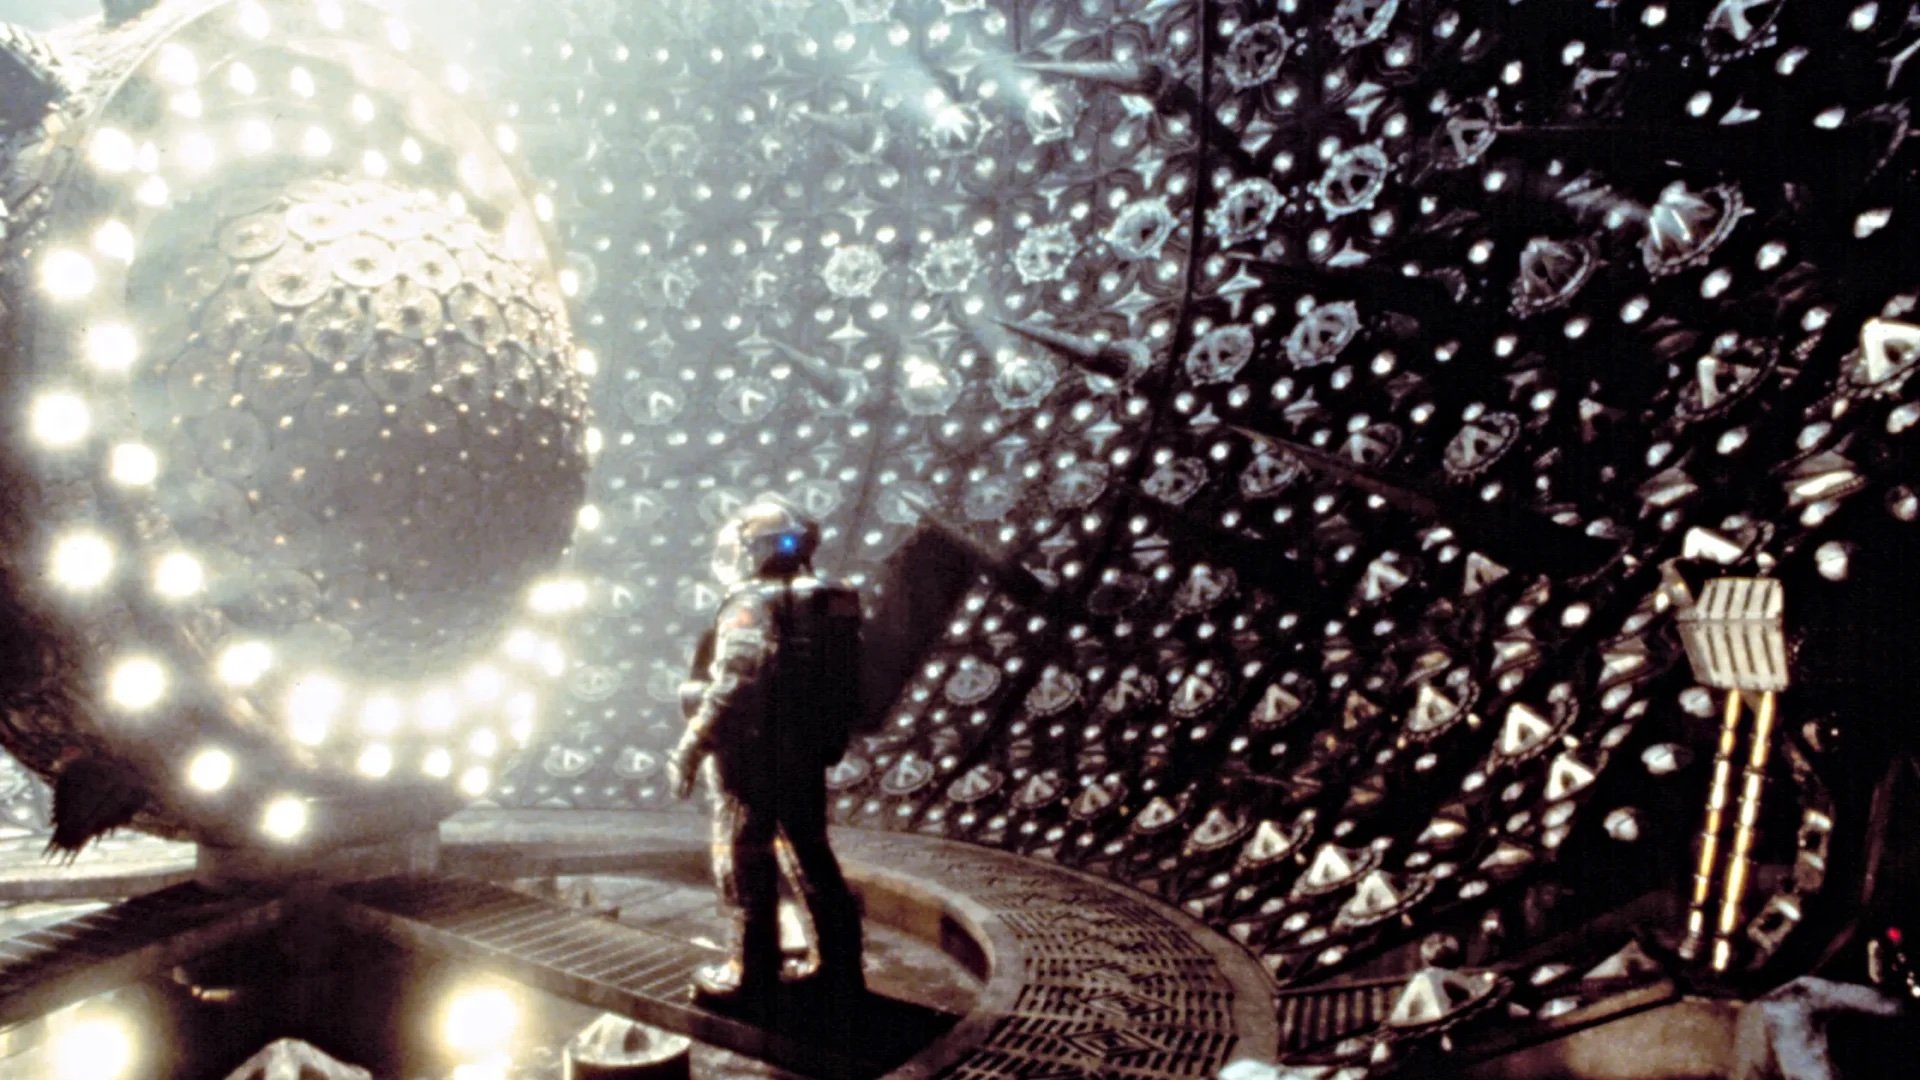 A man in a space suit looking at a futuristic looking reactor.